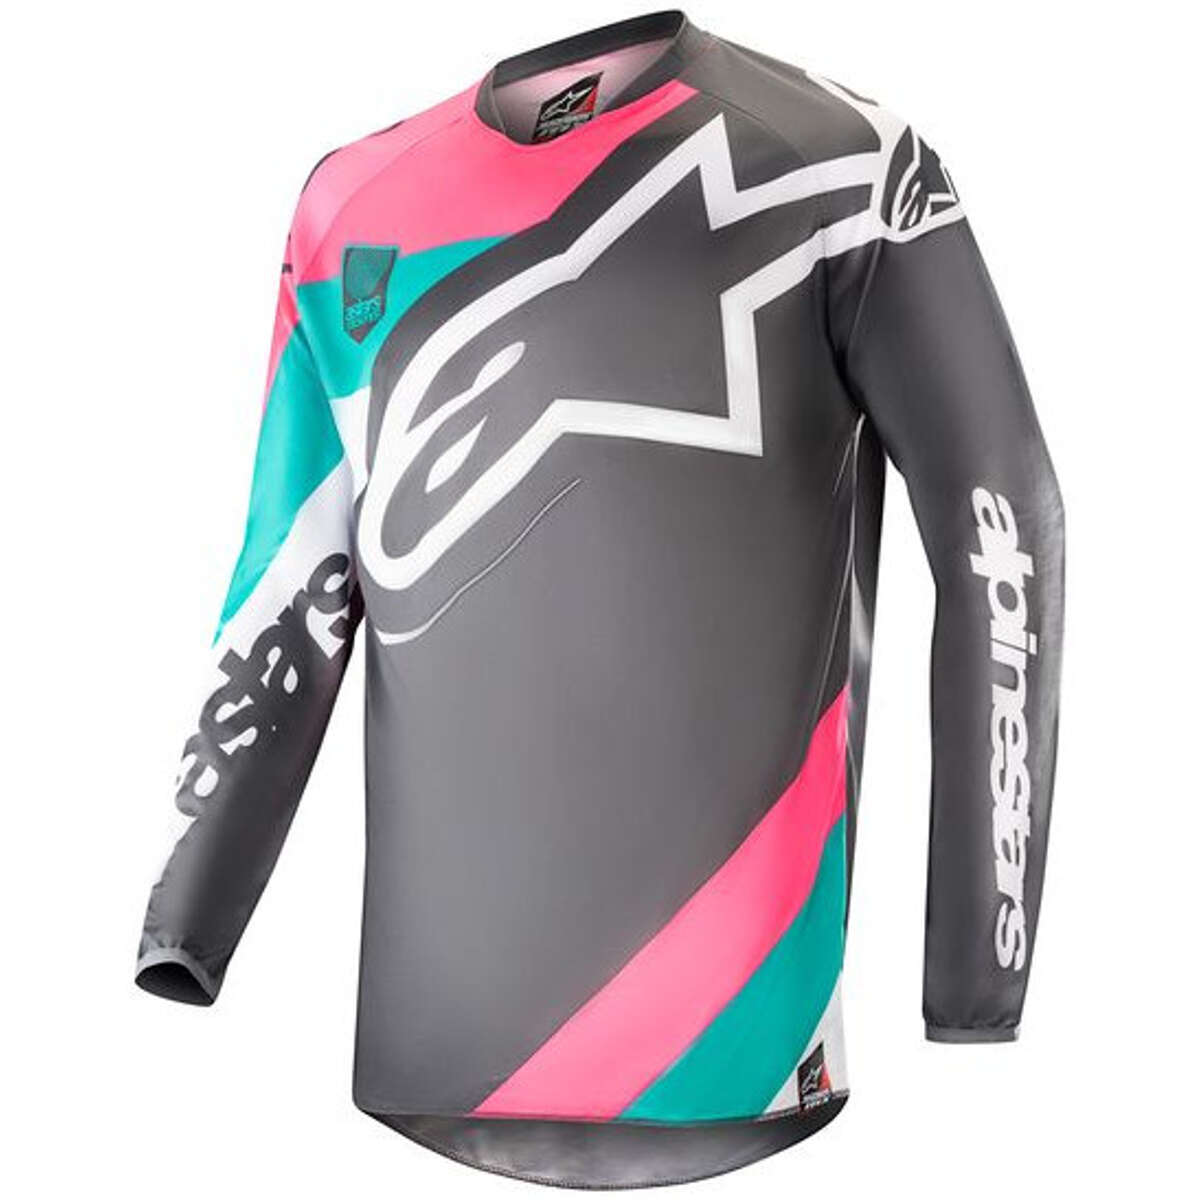 Alpinestars Maillot MX Racer Limited Edition Indy Vice - Grey/Pink/Turqouise